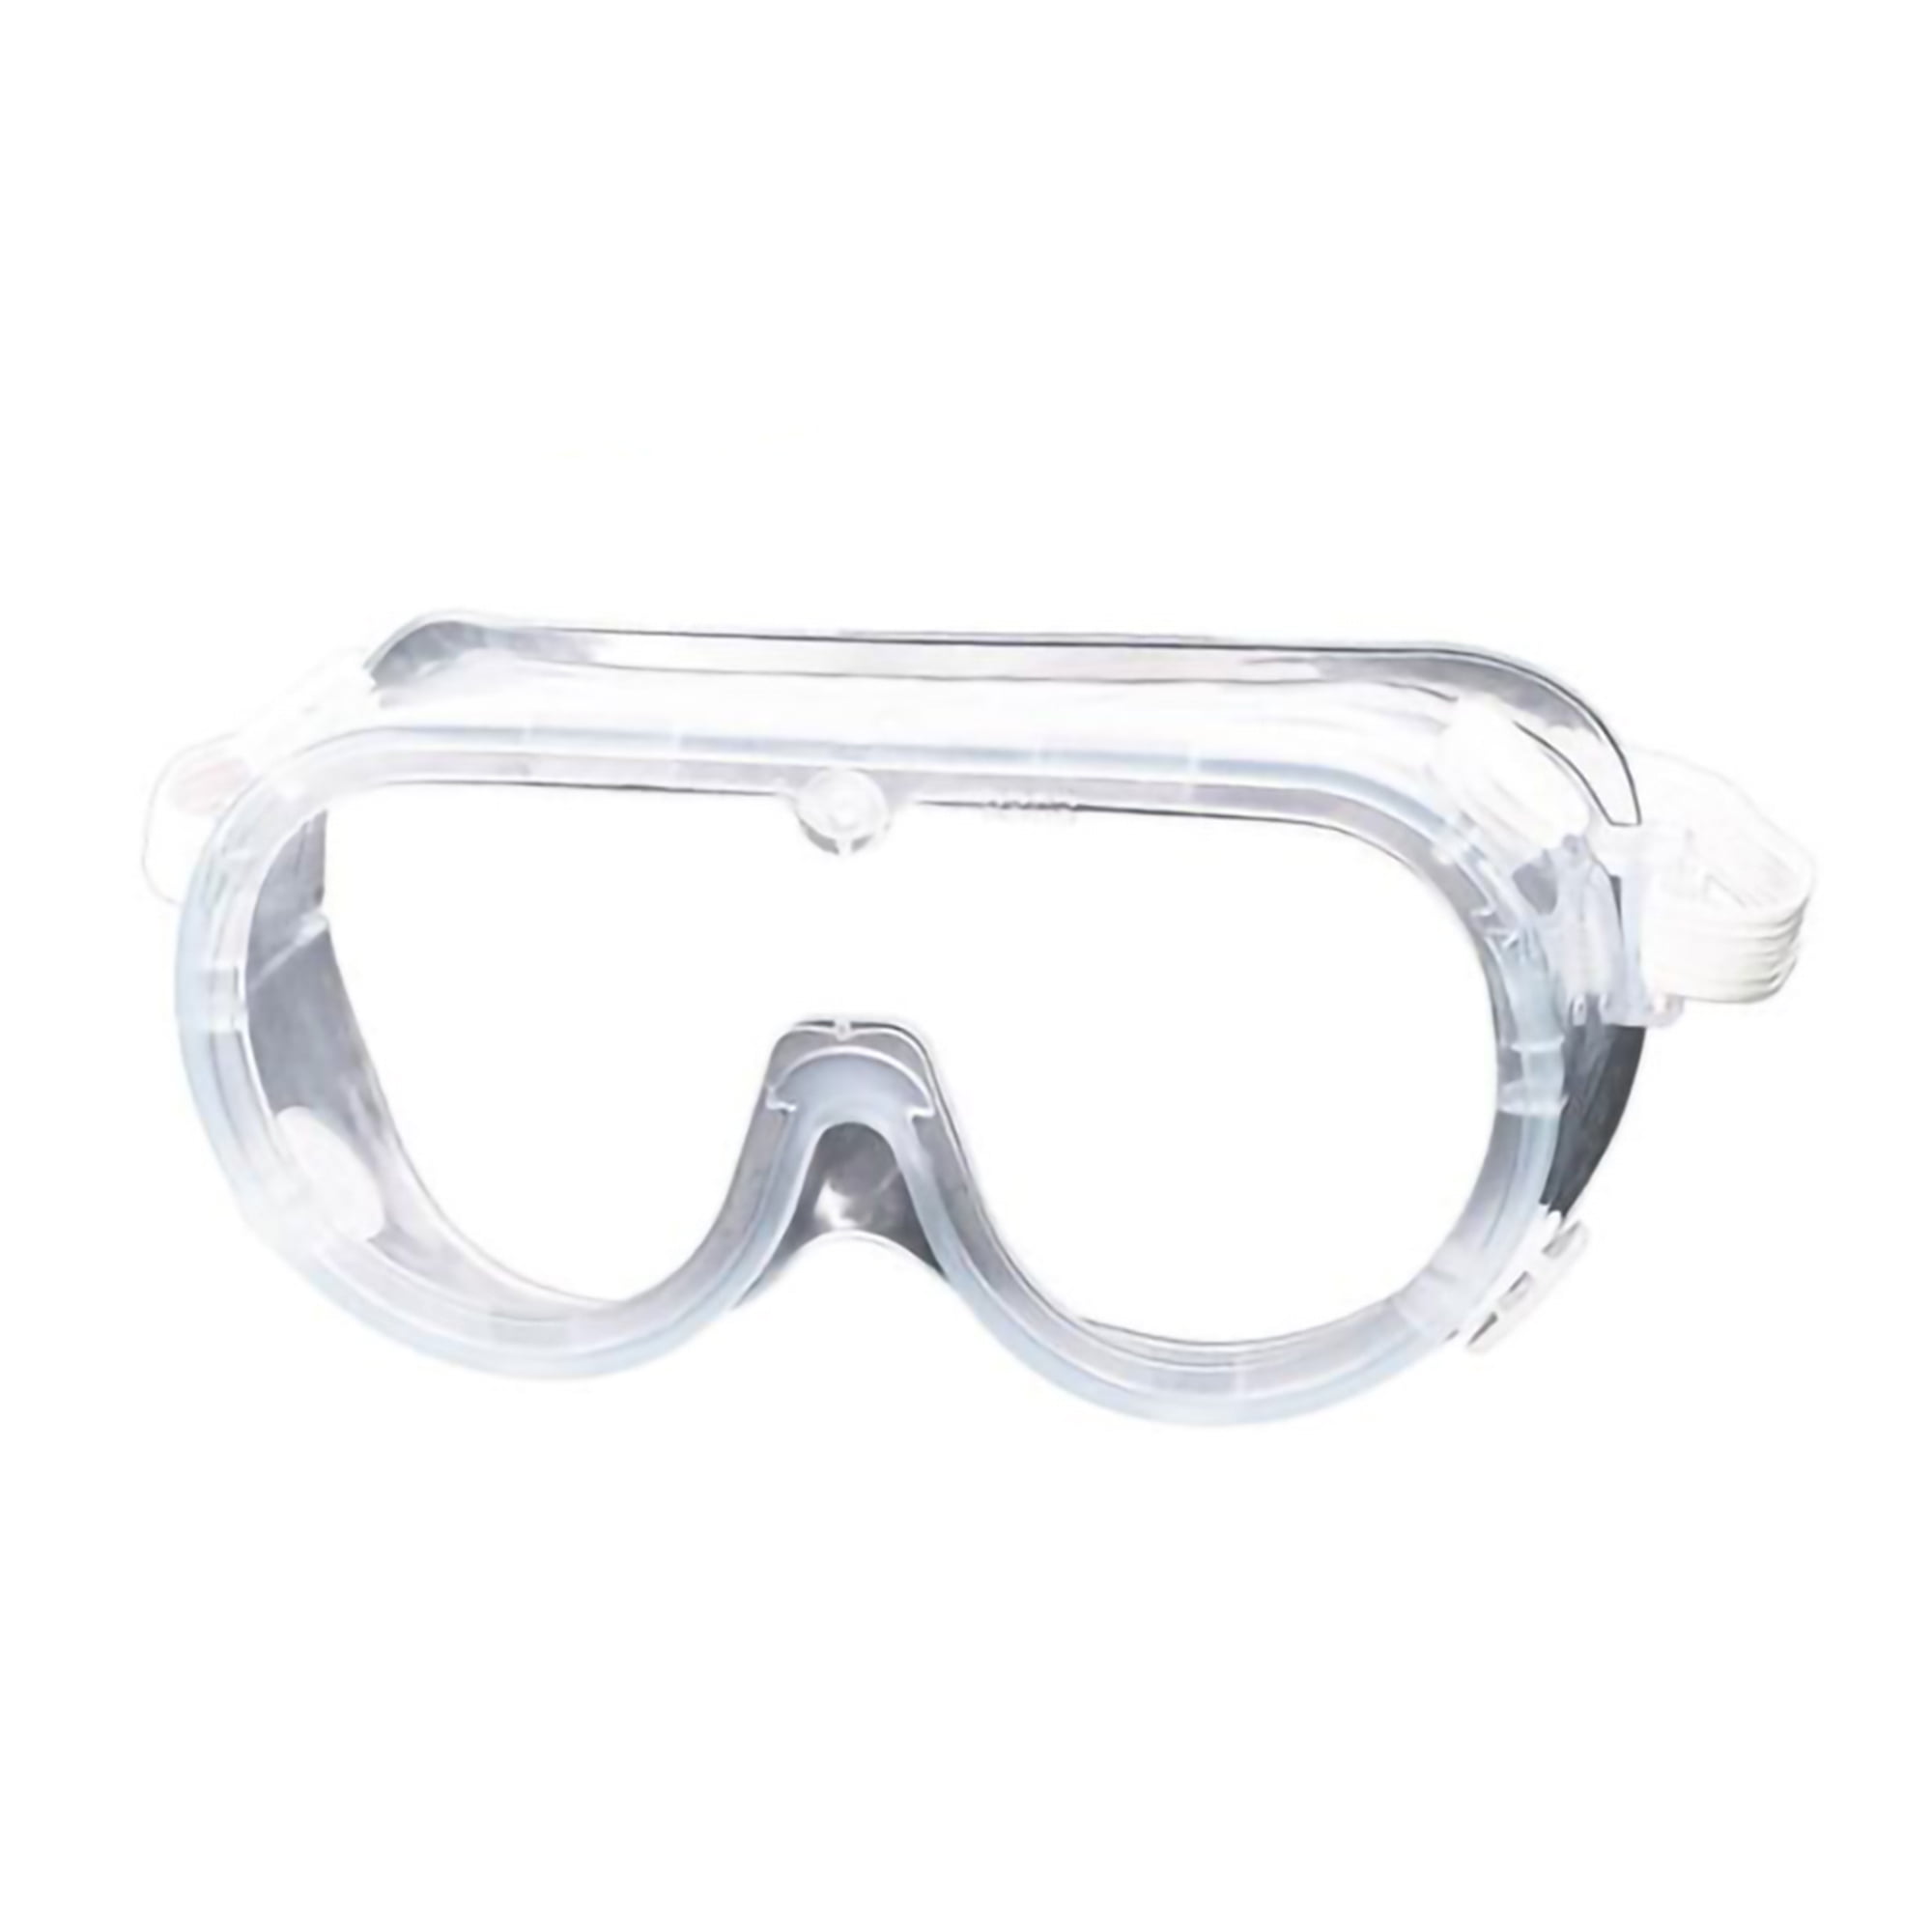 New Eye Protection Anti Fog Clear Protective Safety Glasses For Lab Outdoor Work 